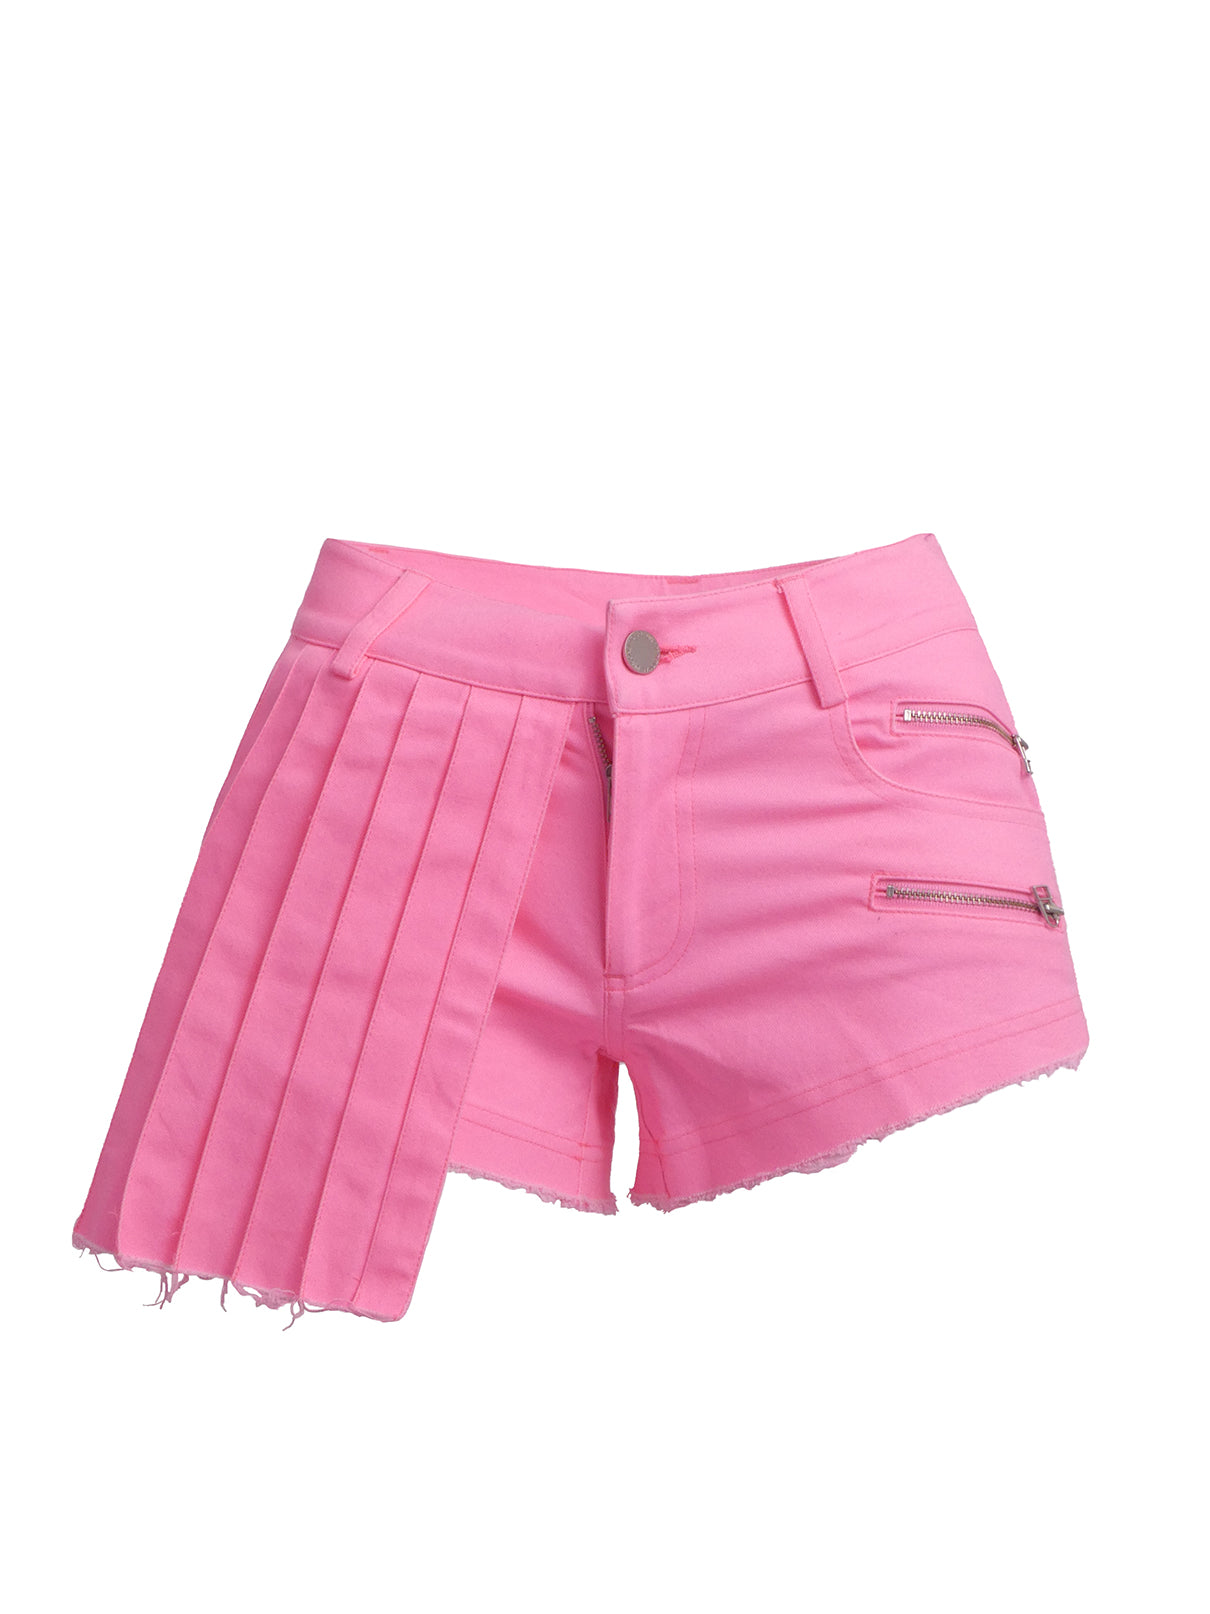 PINK JEANS SHORTS WITH PLEATED DETAIL